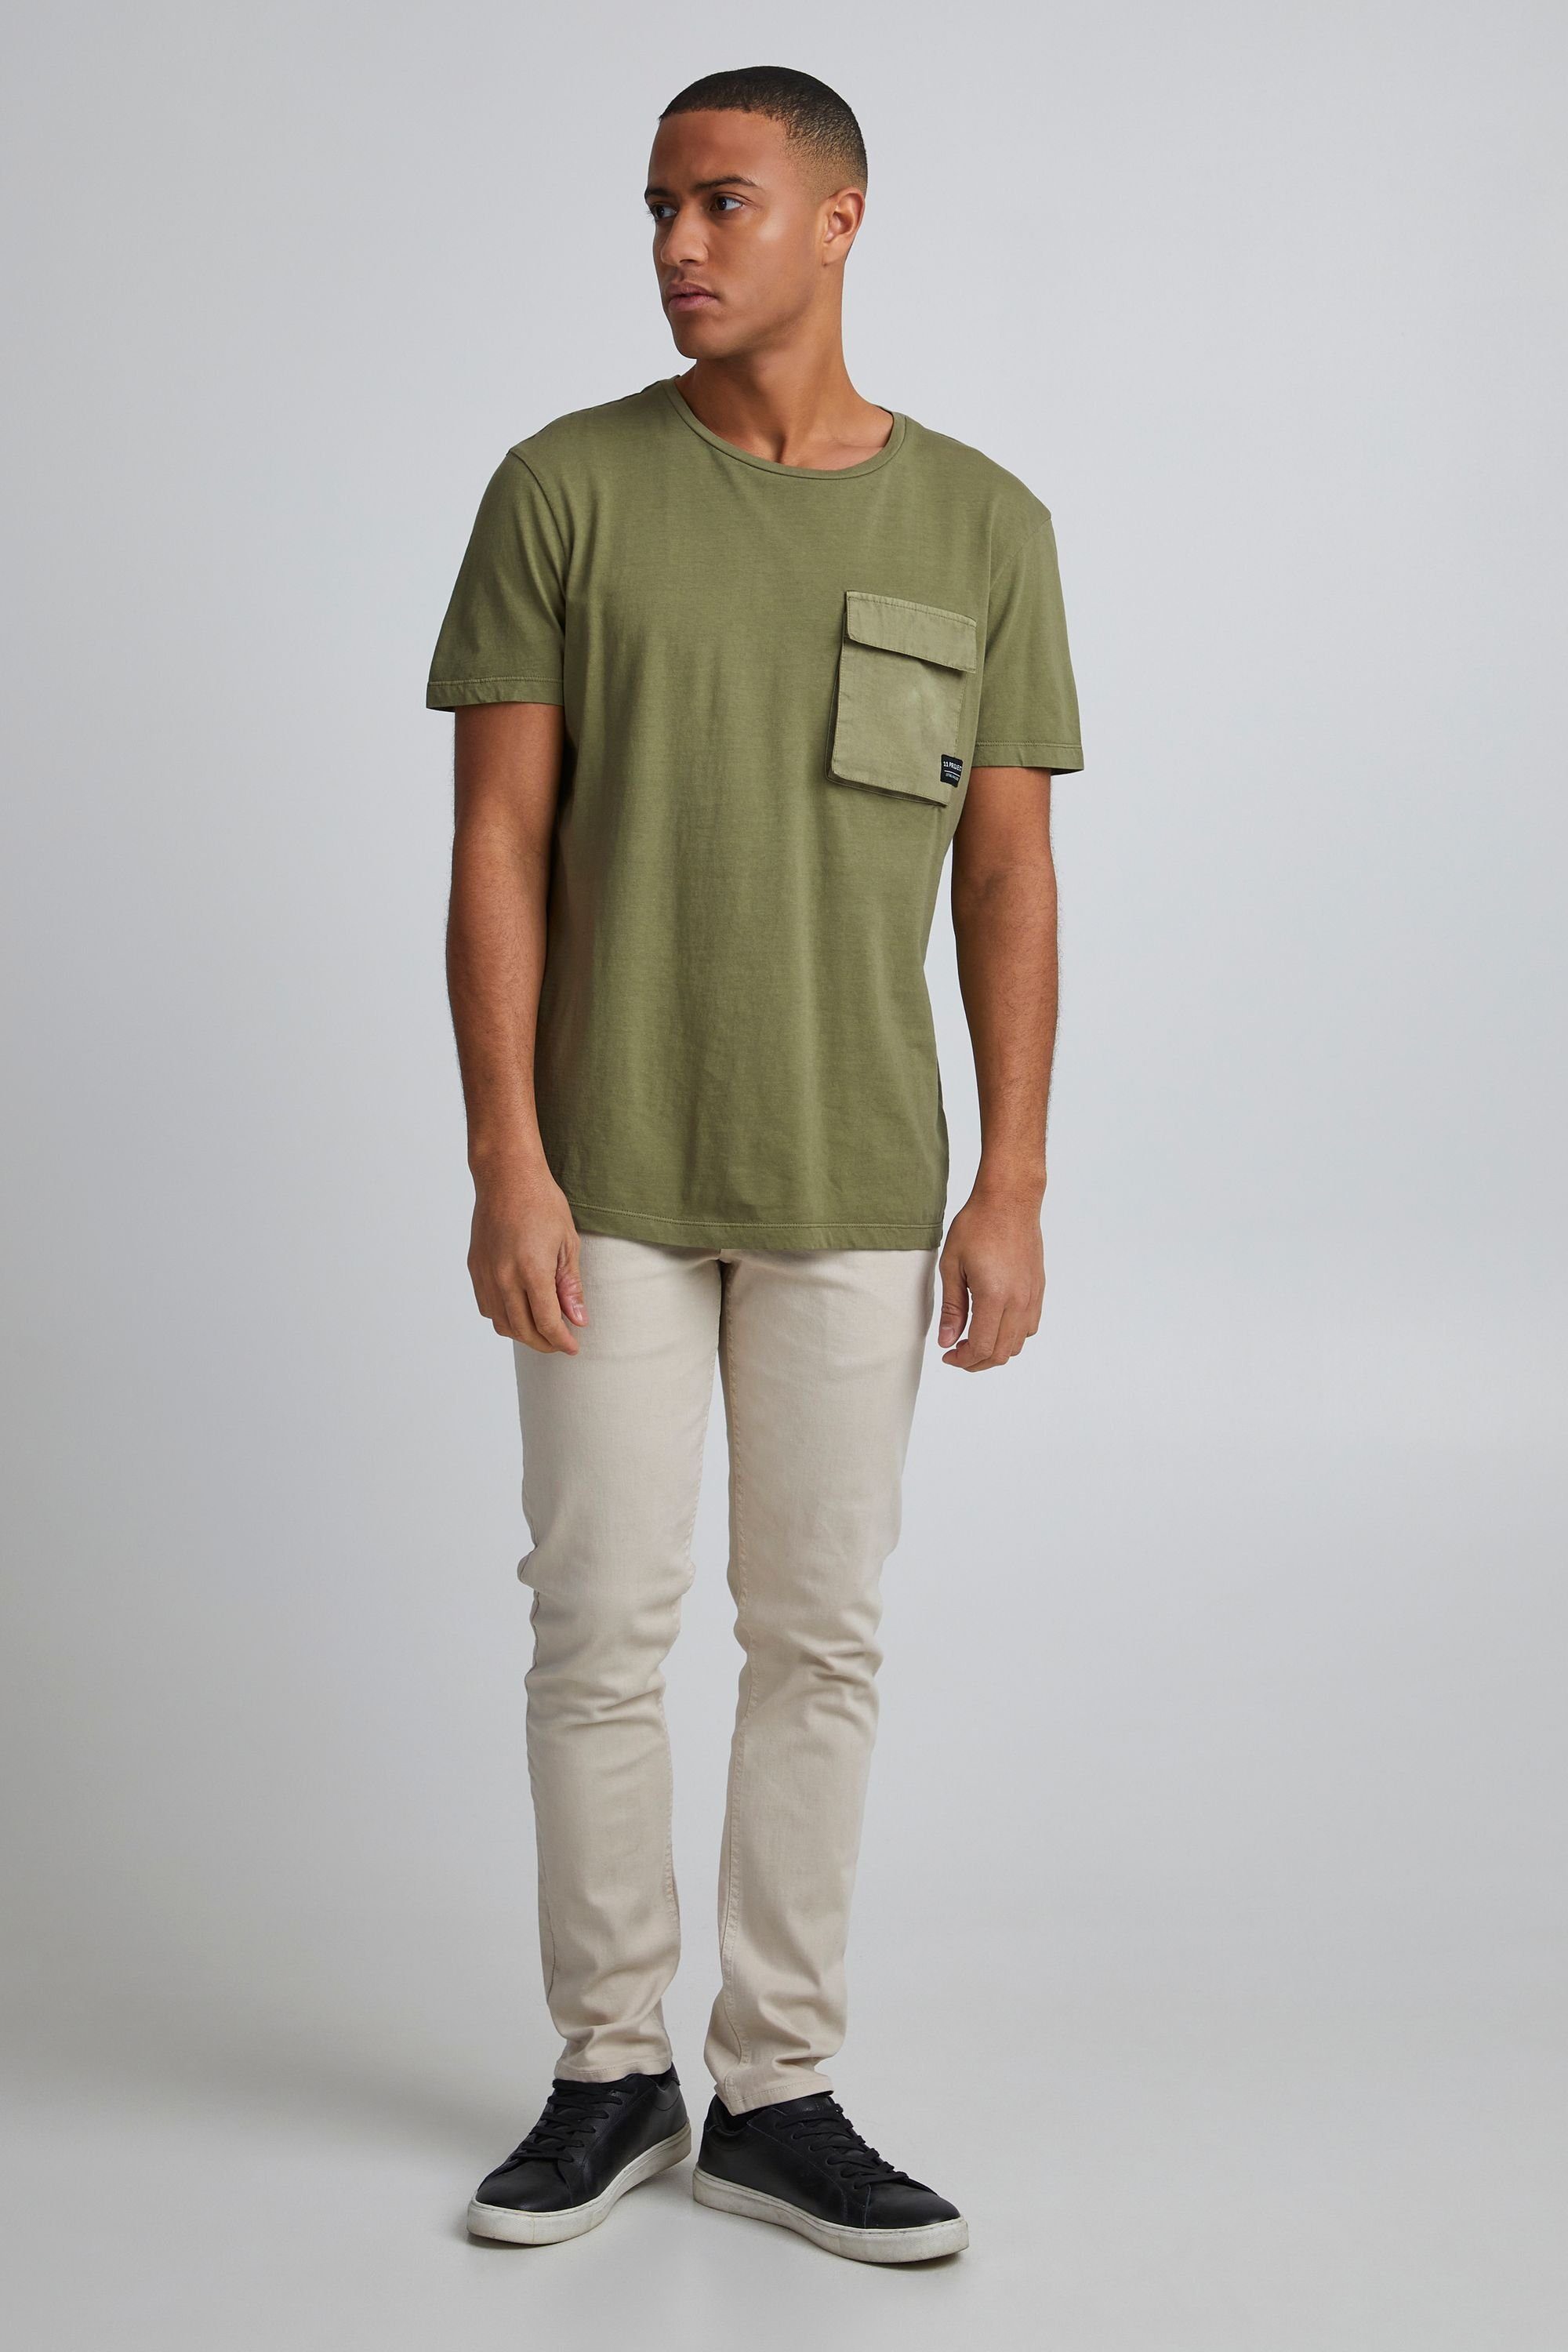 Project Green Loden T-Shirt 11 Project PRMads 11